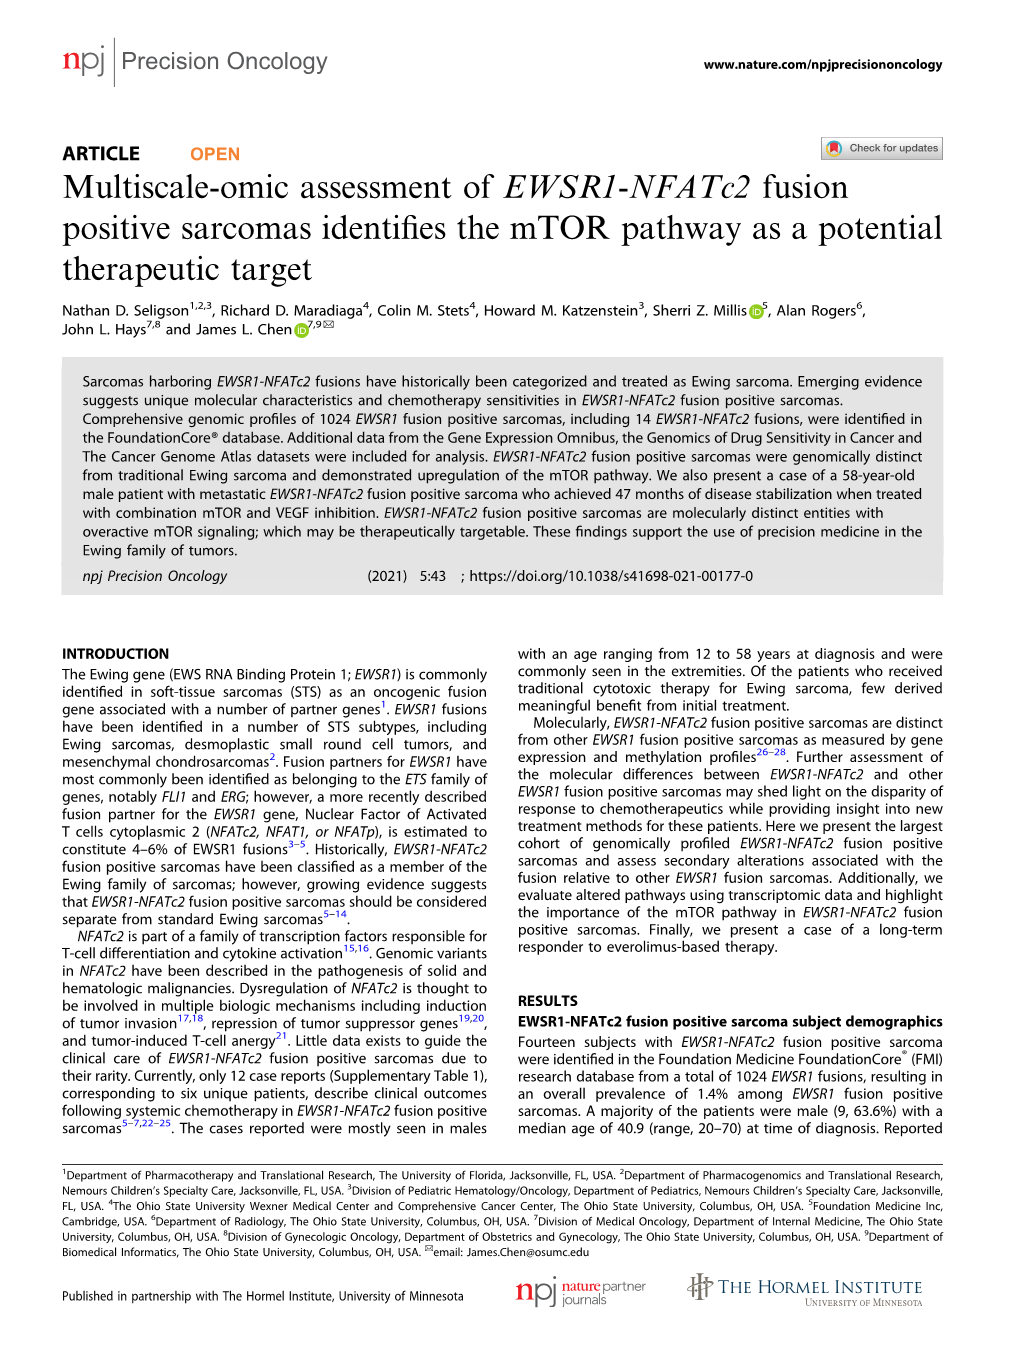 Multiscale-Omic Assessment of EWSR1-Nfatc2 Fusion Positive Sarcomas Identiﬁes the Mtor Pathway As a Potential Therapeutic Target